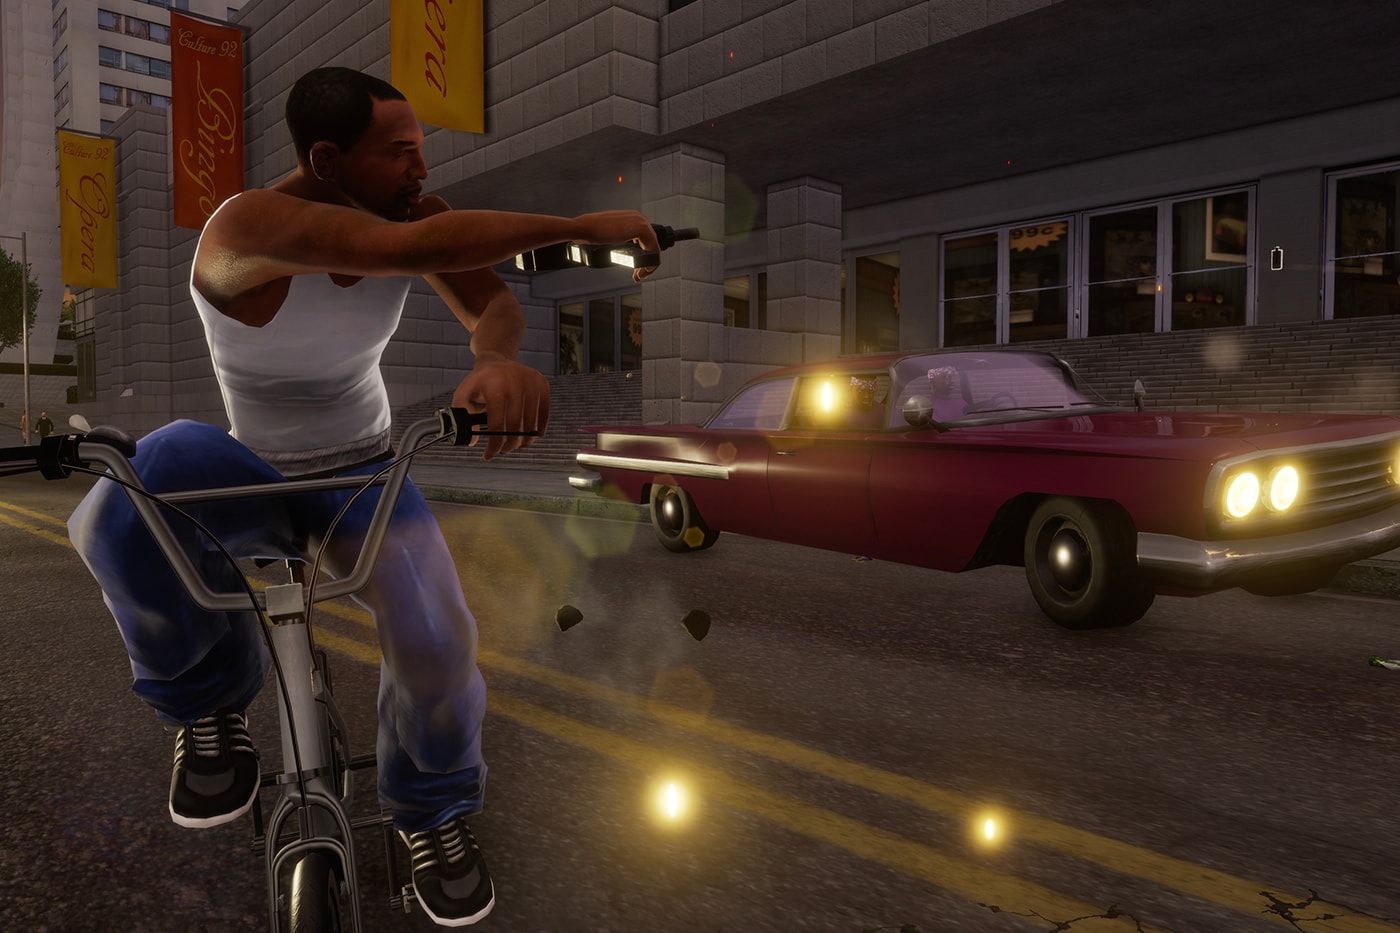 Grand Theft Auto The Trilogy: The Definitive Edition Screenshots Comparison Footage Release Info Date Buy Price Rockstar Games San Andreas Liberty City Vice City III